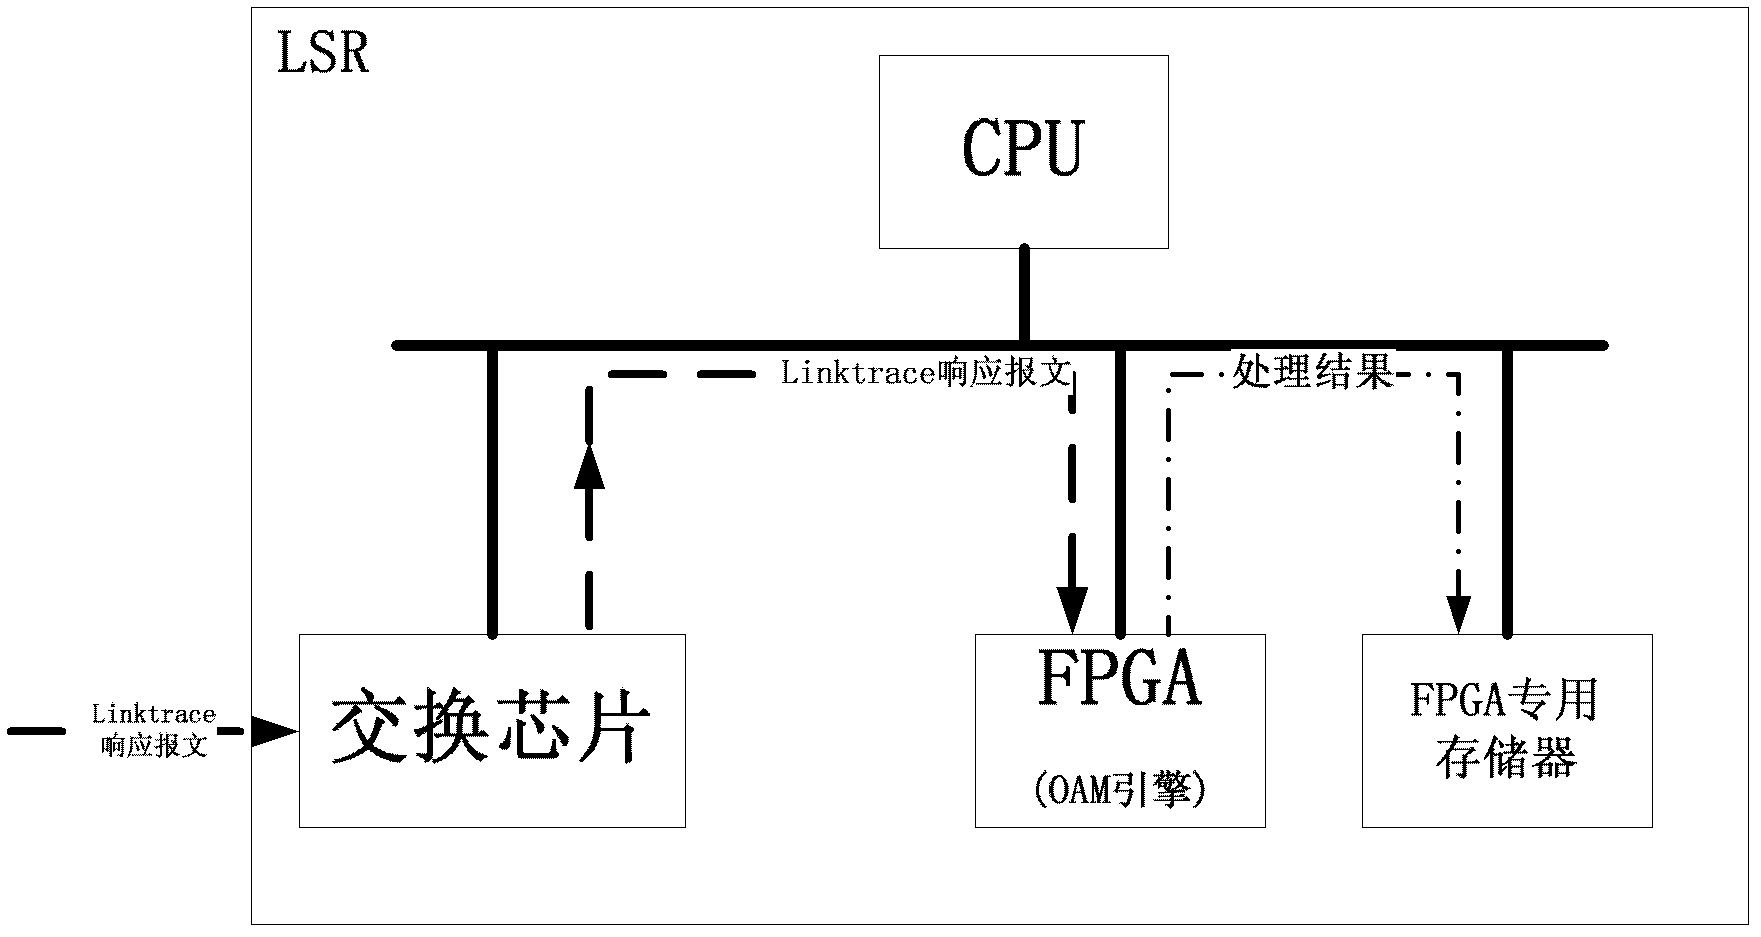 Method for achieving Linktrace of multi-protocol label switching-transmission parameter (MPLS-TP) operation, administration and maintenance (OAM) on basis of field programmable gata array (FPGA)